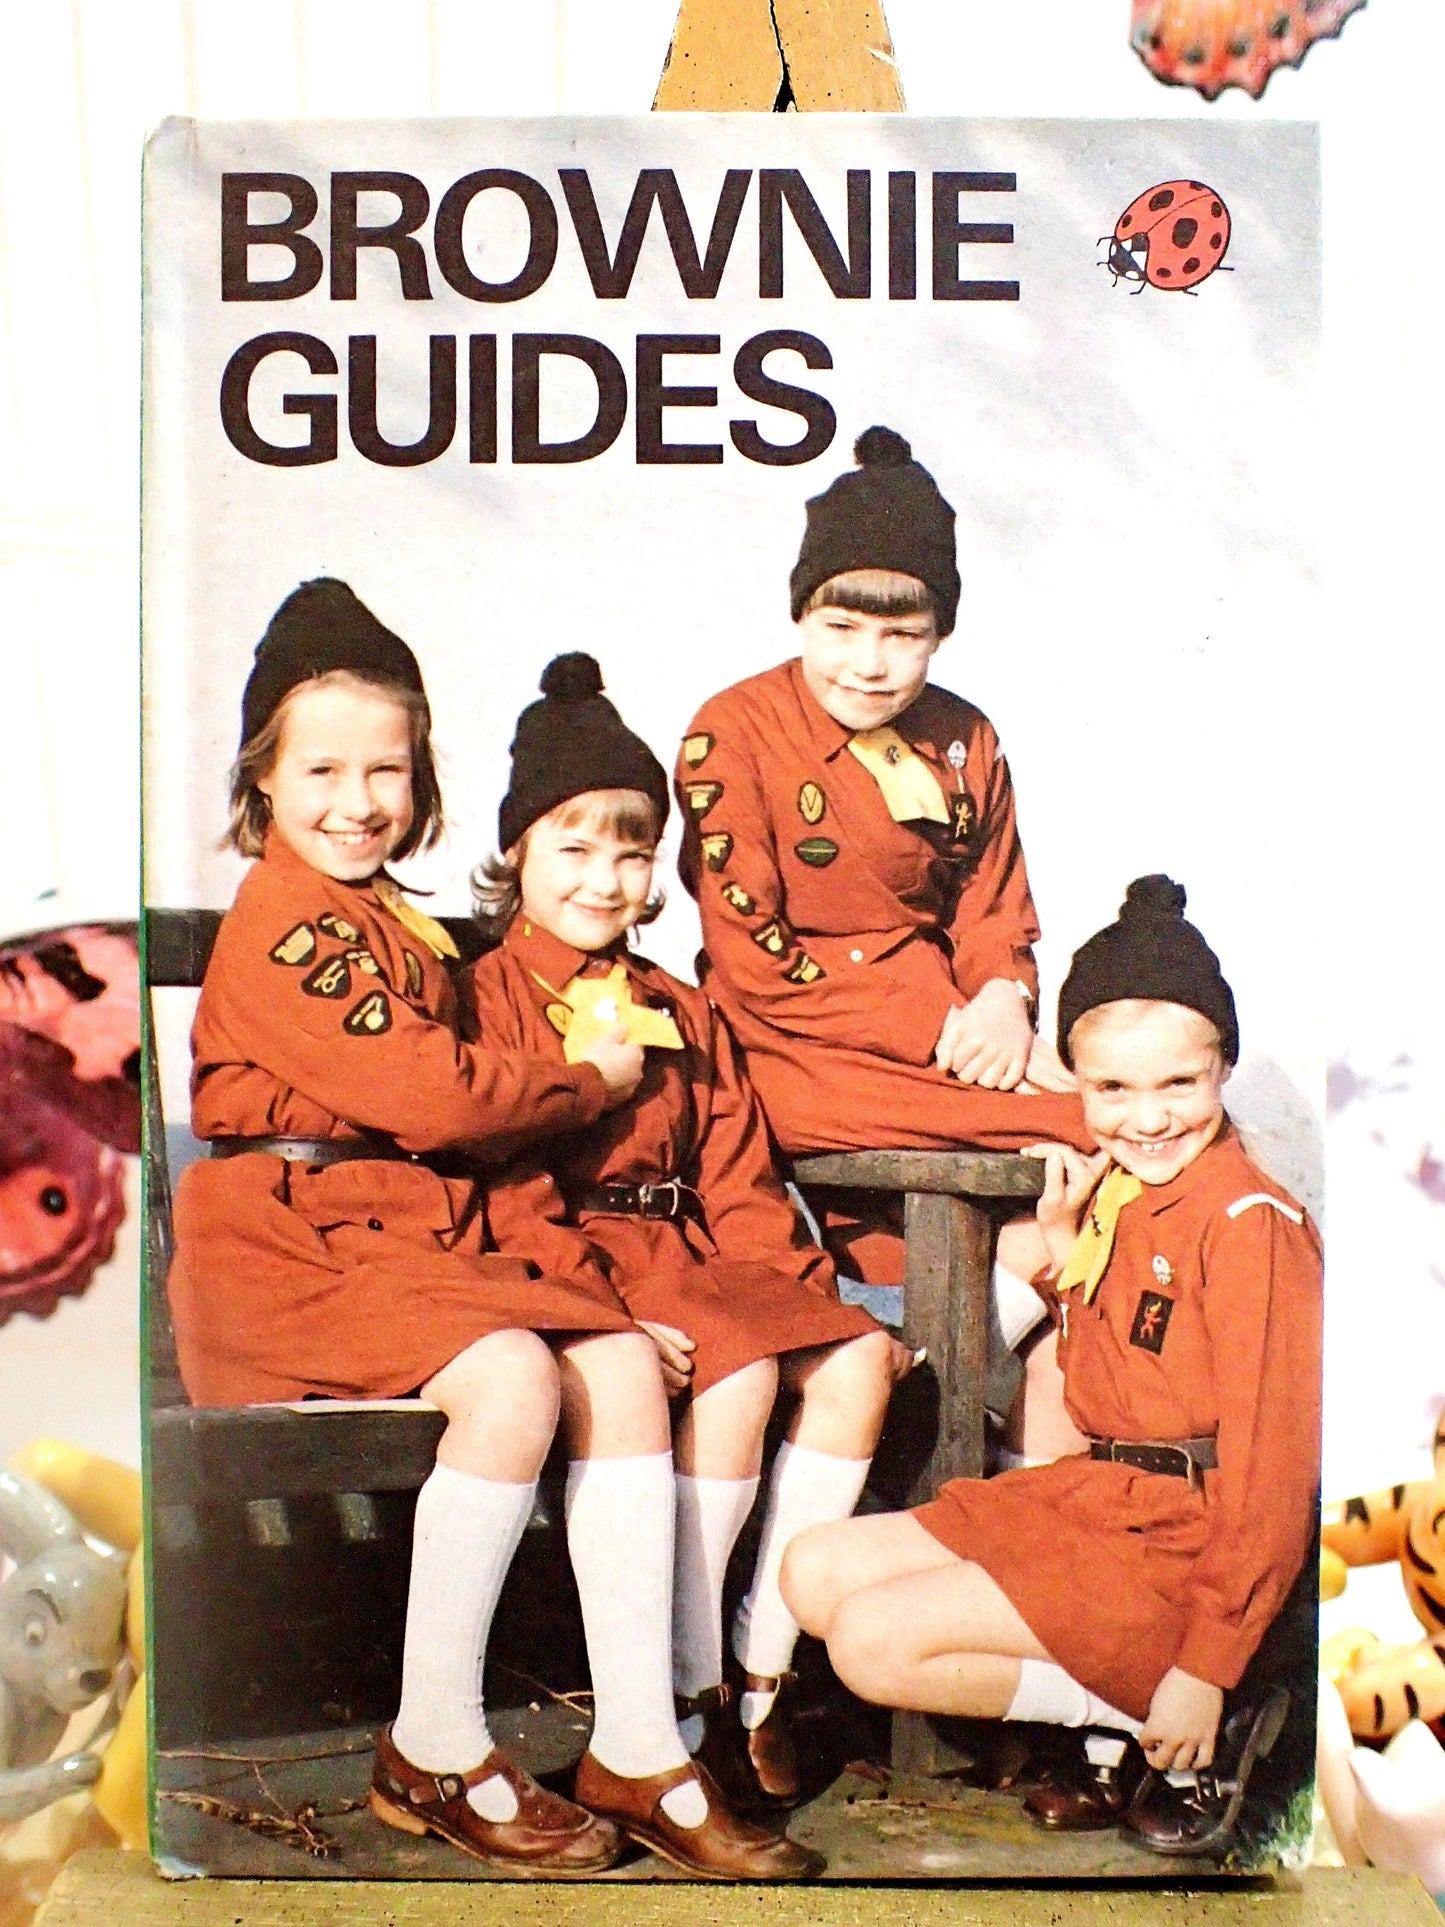 Brownie Guides Super Vintage LadyBird Childrens Book Guiding Scouting history Series 706 Matt Cover